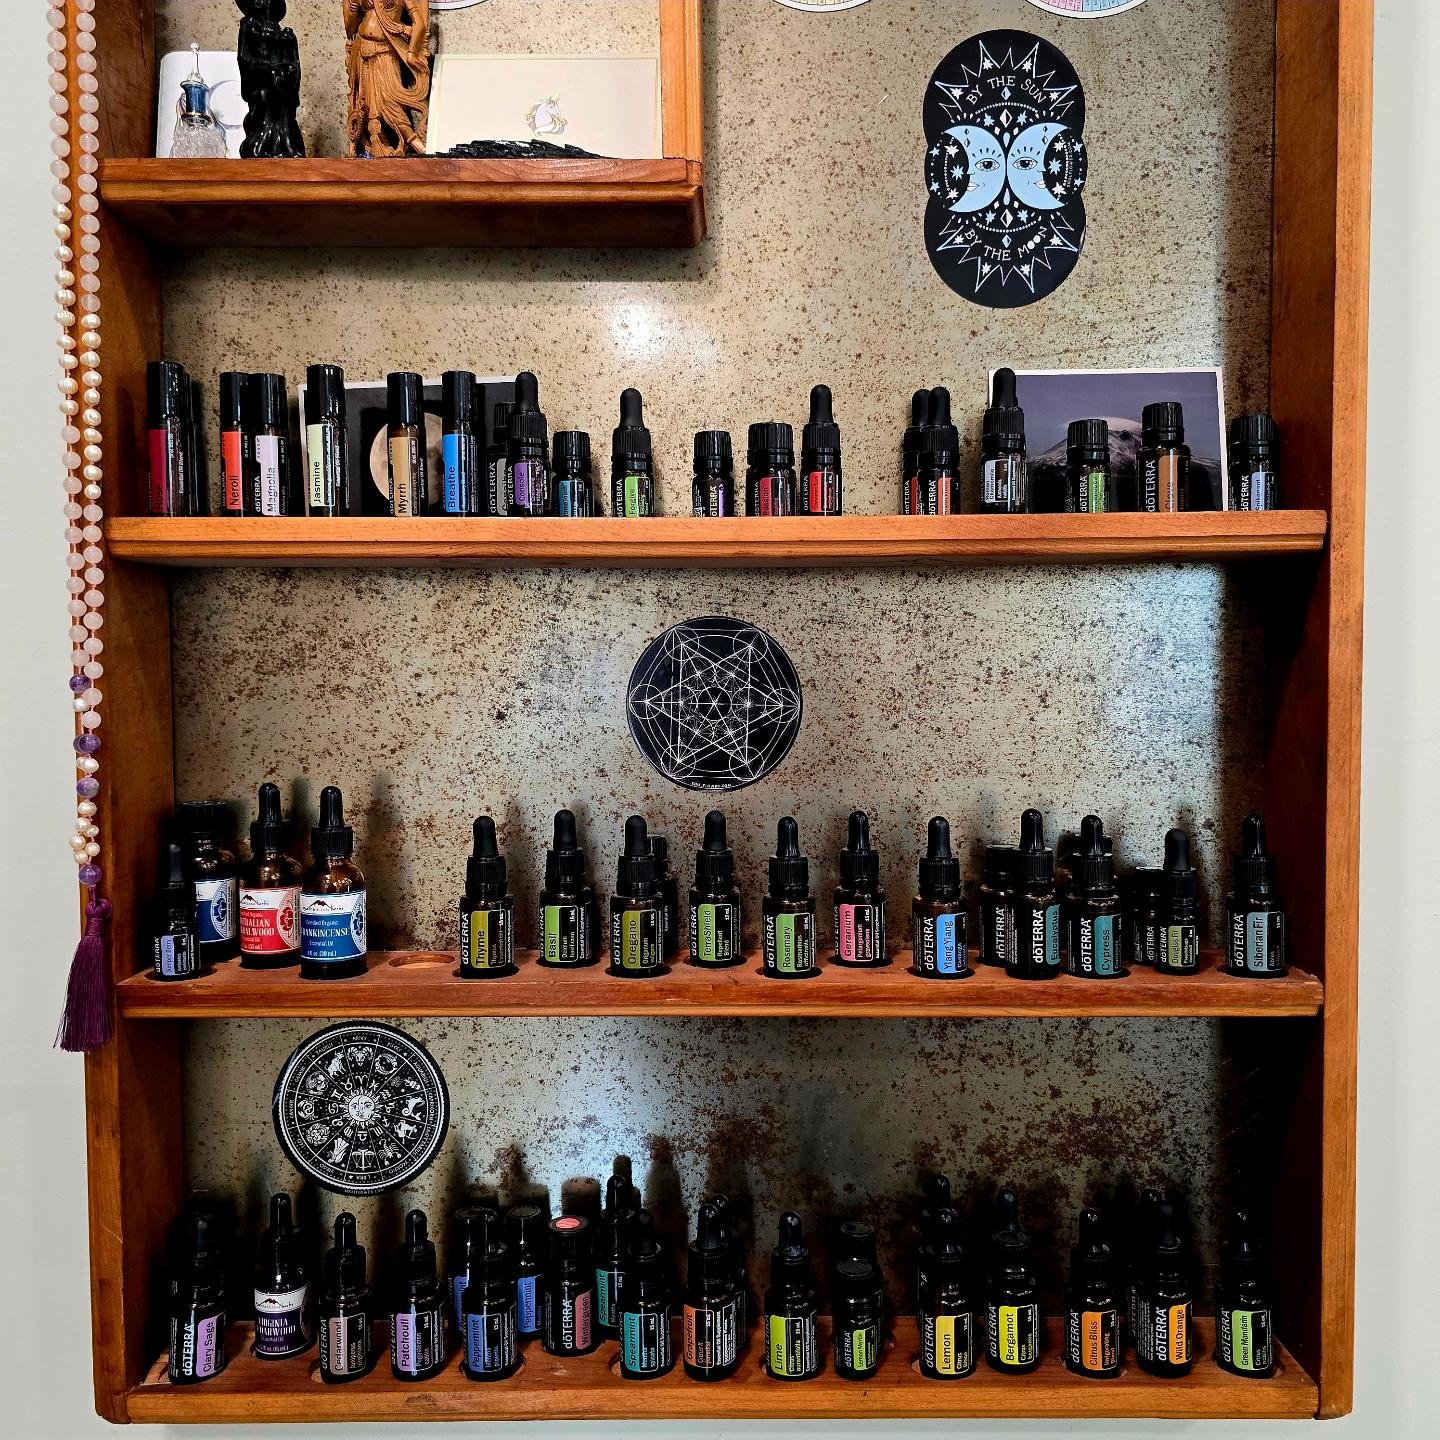 💫 Essential Oil Stock 💫⁣
⁣
If you want to expand your oil collection or start one, I have a ton here!⁣
⁣
Well over $1000 in oils and supplies. Most bottles are open. I'm letting it all go for a steal!⁣
⁣
DM or stop by 🫠